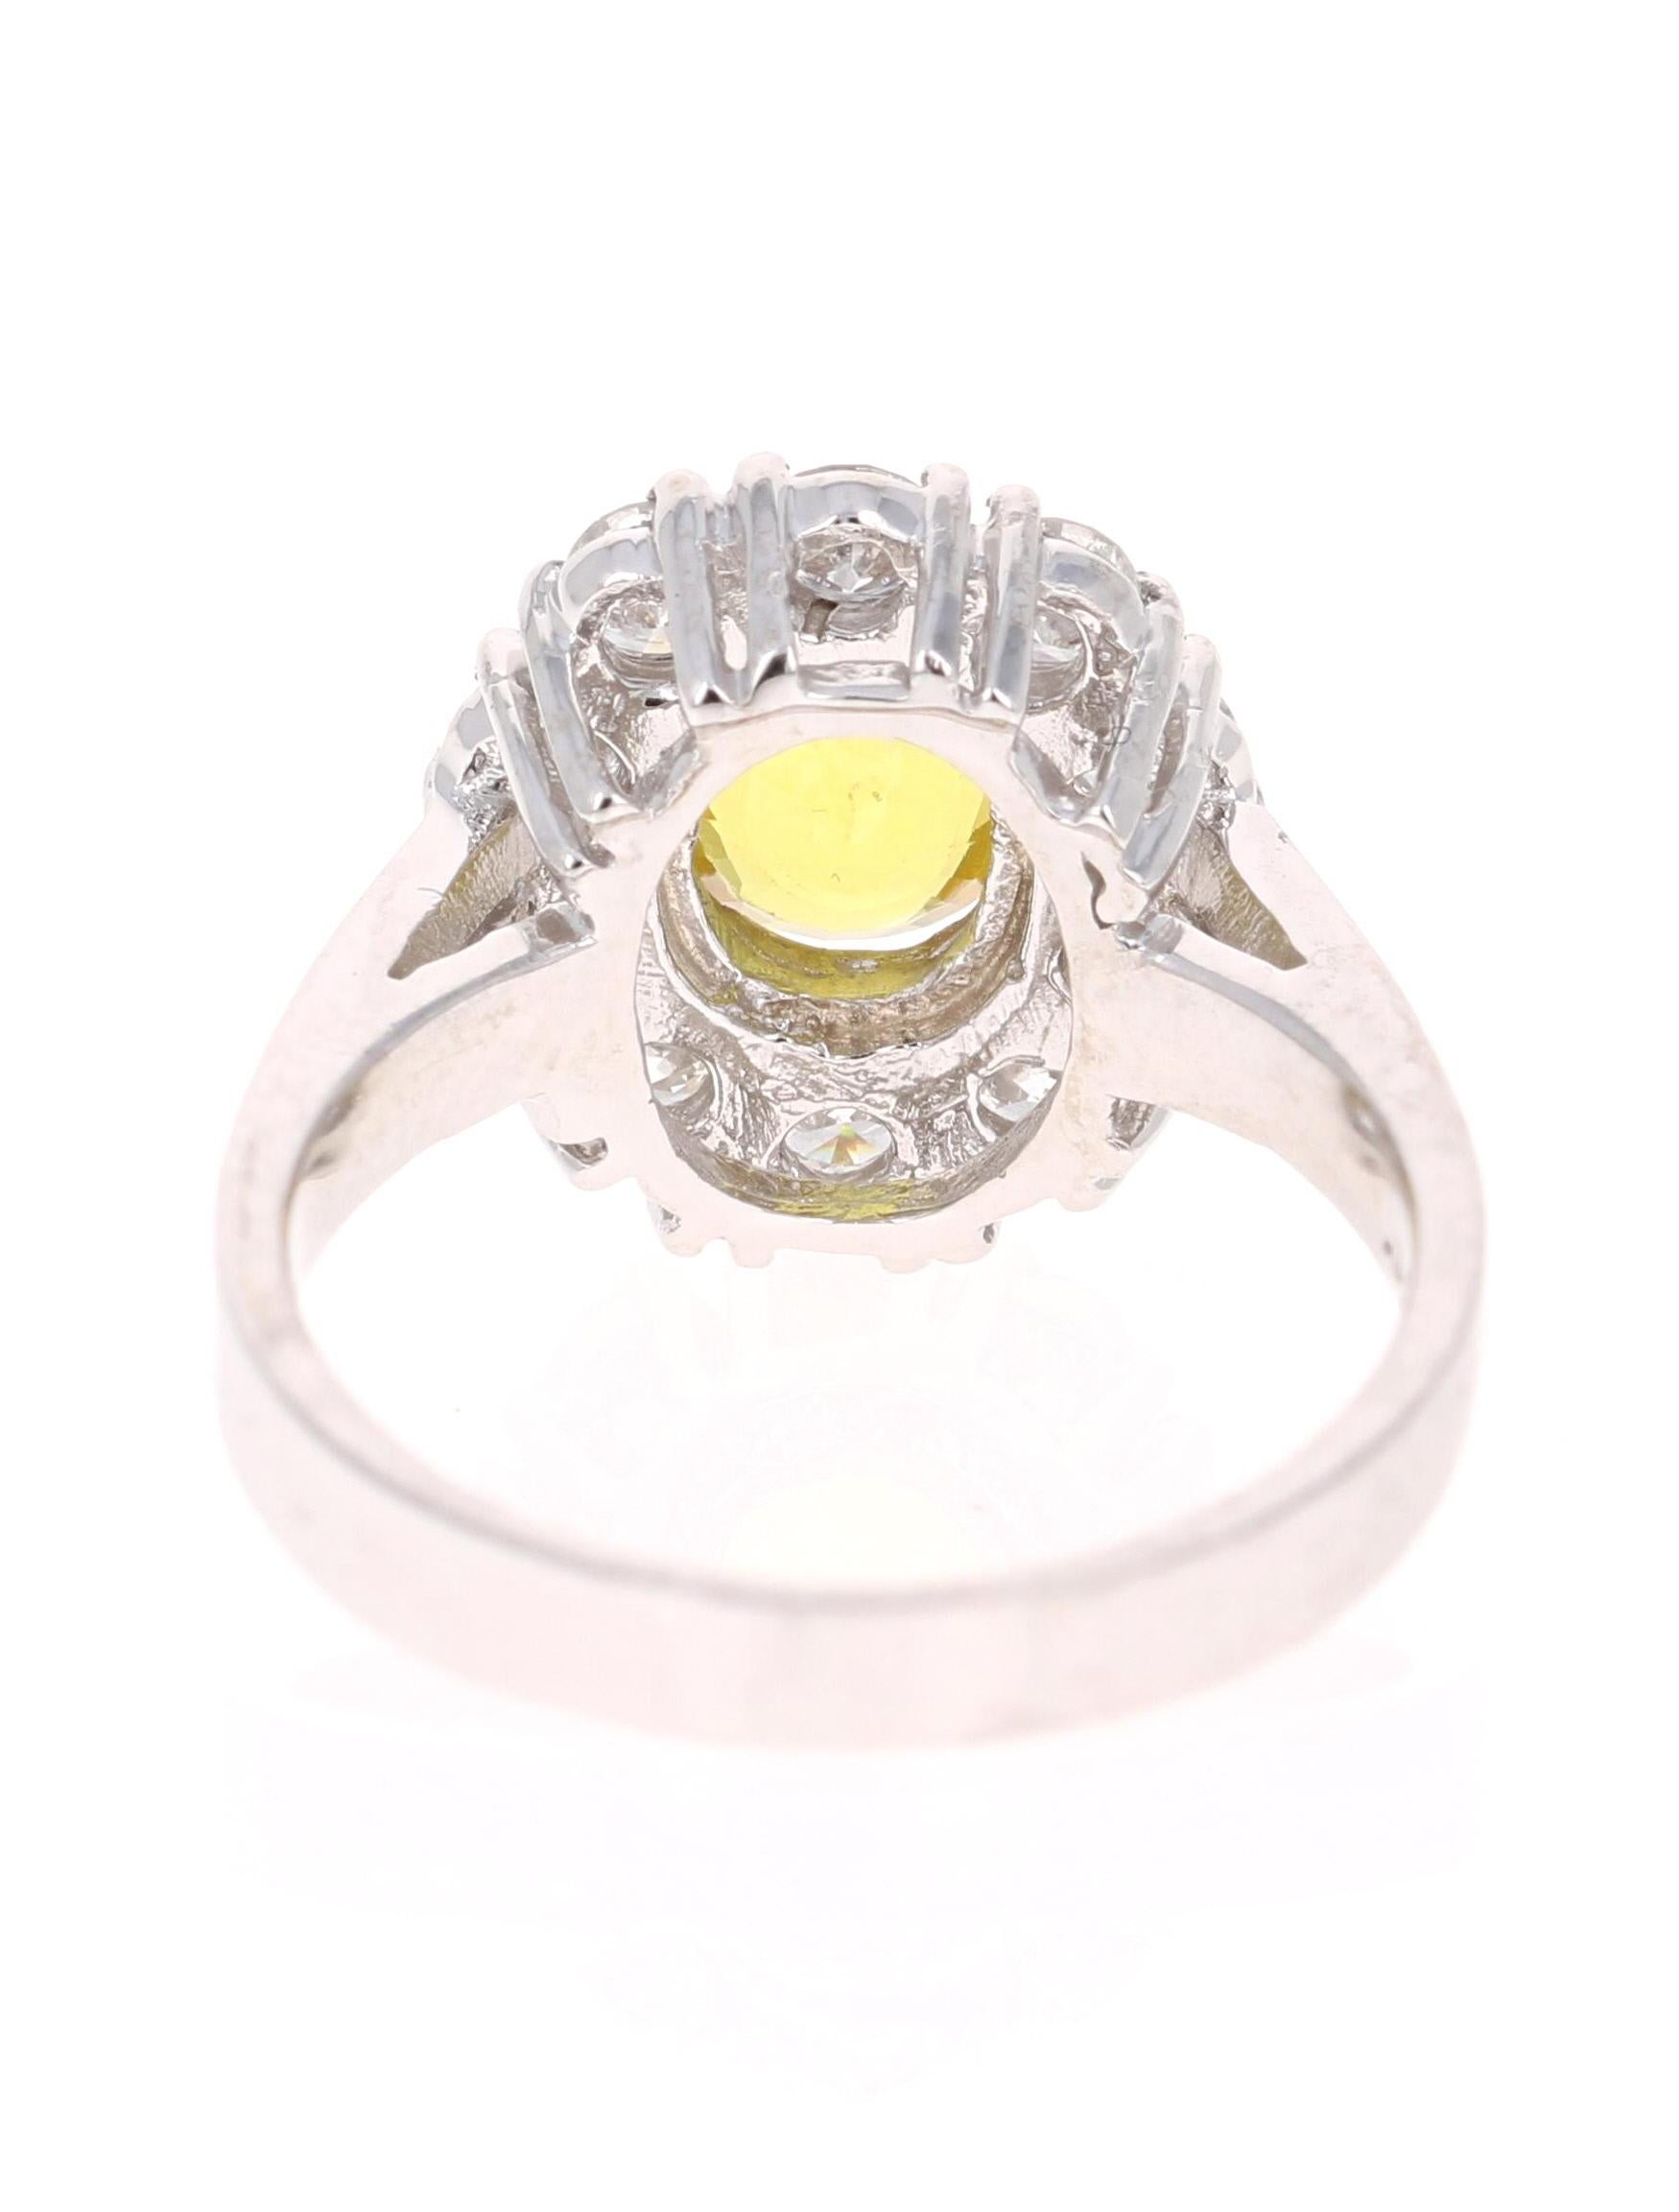 Oval Cut 2.66 Carat Yellow Sapphire Diamond White Gold Engagement Ring  For Sale